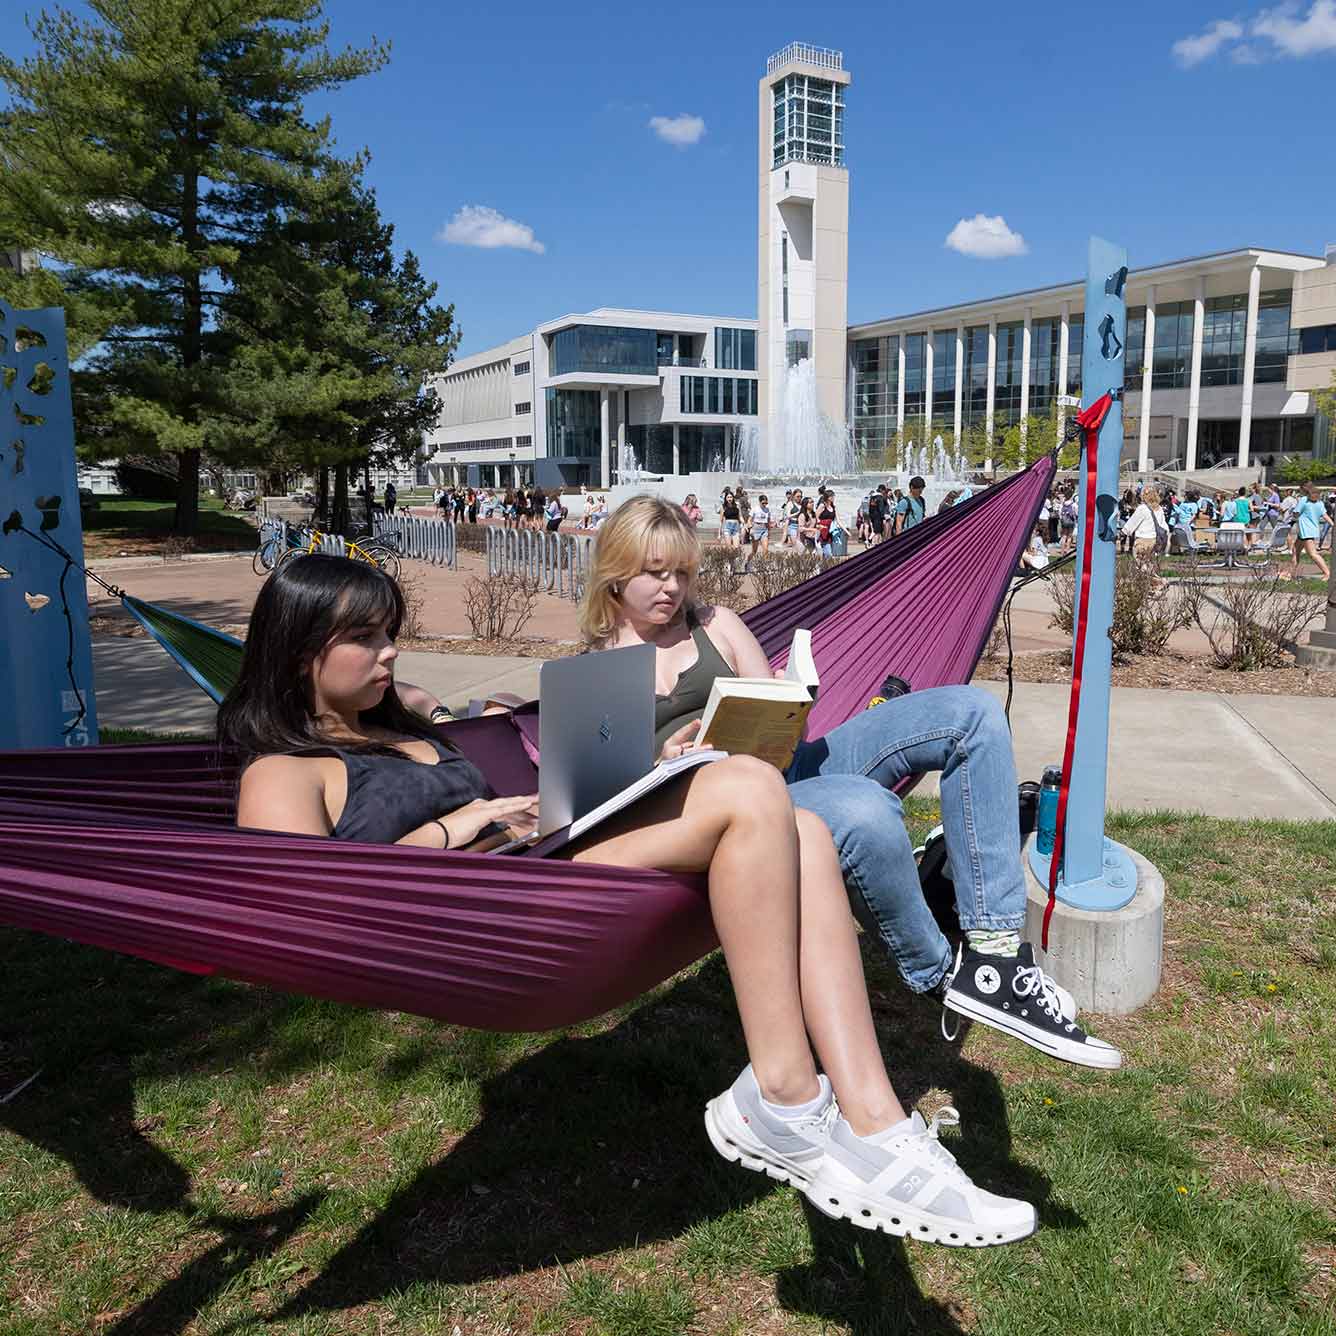 Two students sitting in a hammock on a sunny day while using their laptops. A group of students walk past the fountain in the background.